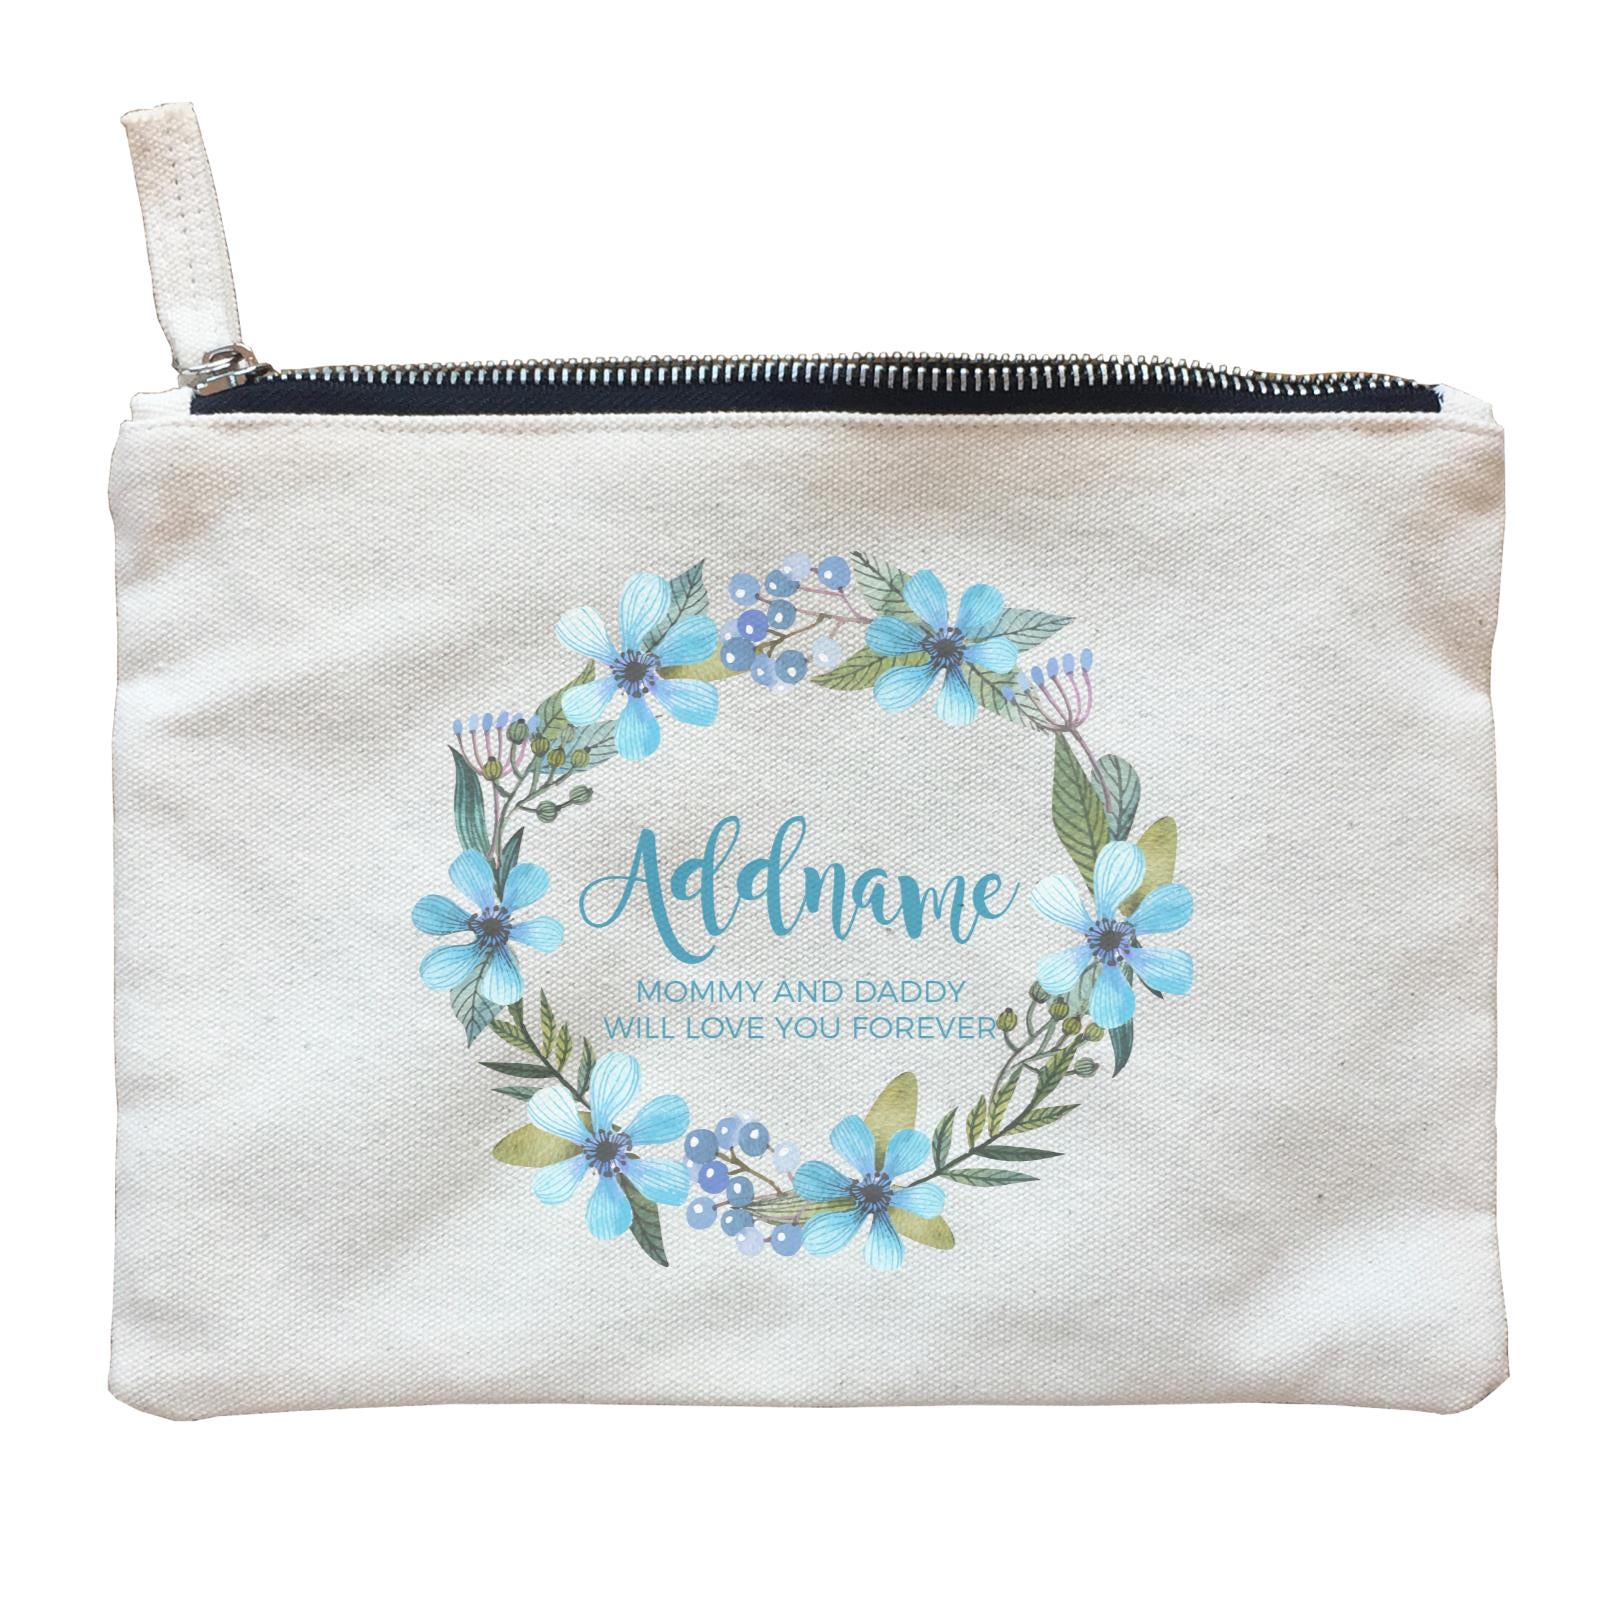 Turqoise Flower Wreath Personalizable with Name and Text Zipper Pouch